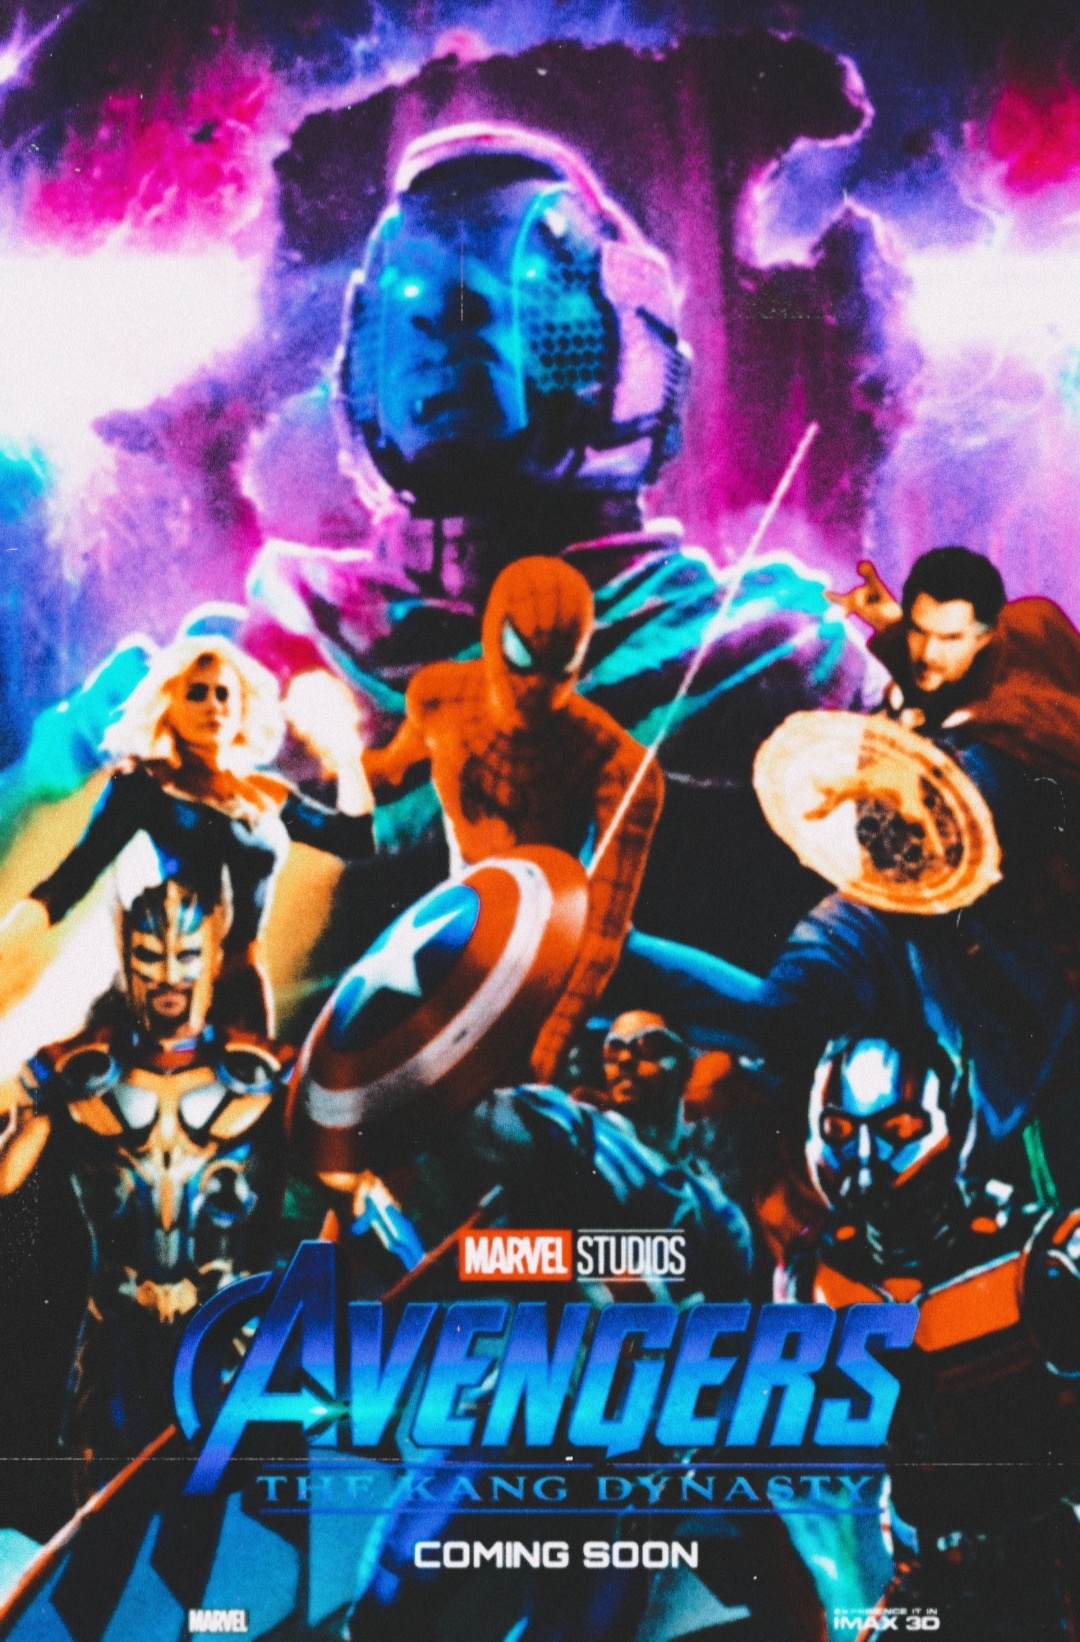 Avengers: The Kang Dynasty Fan-Made poster by me : r/marvelstudios